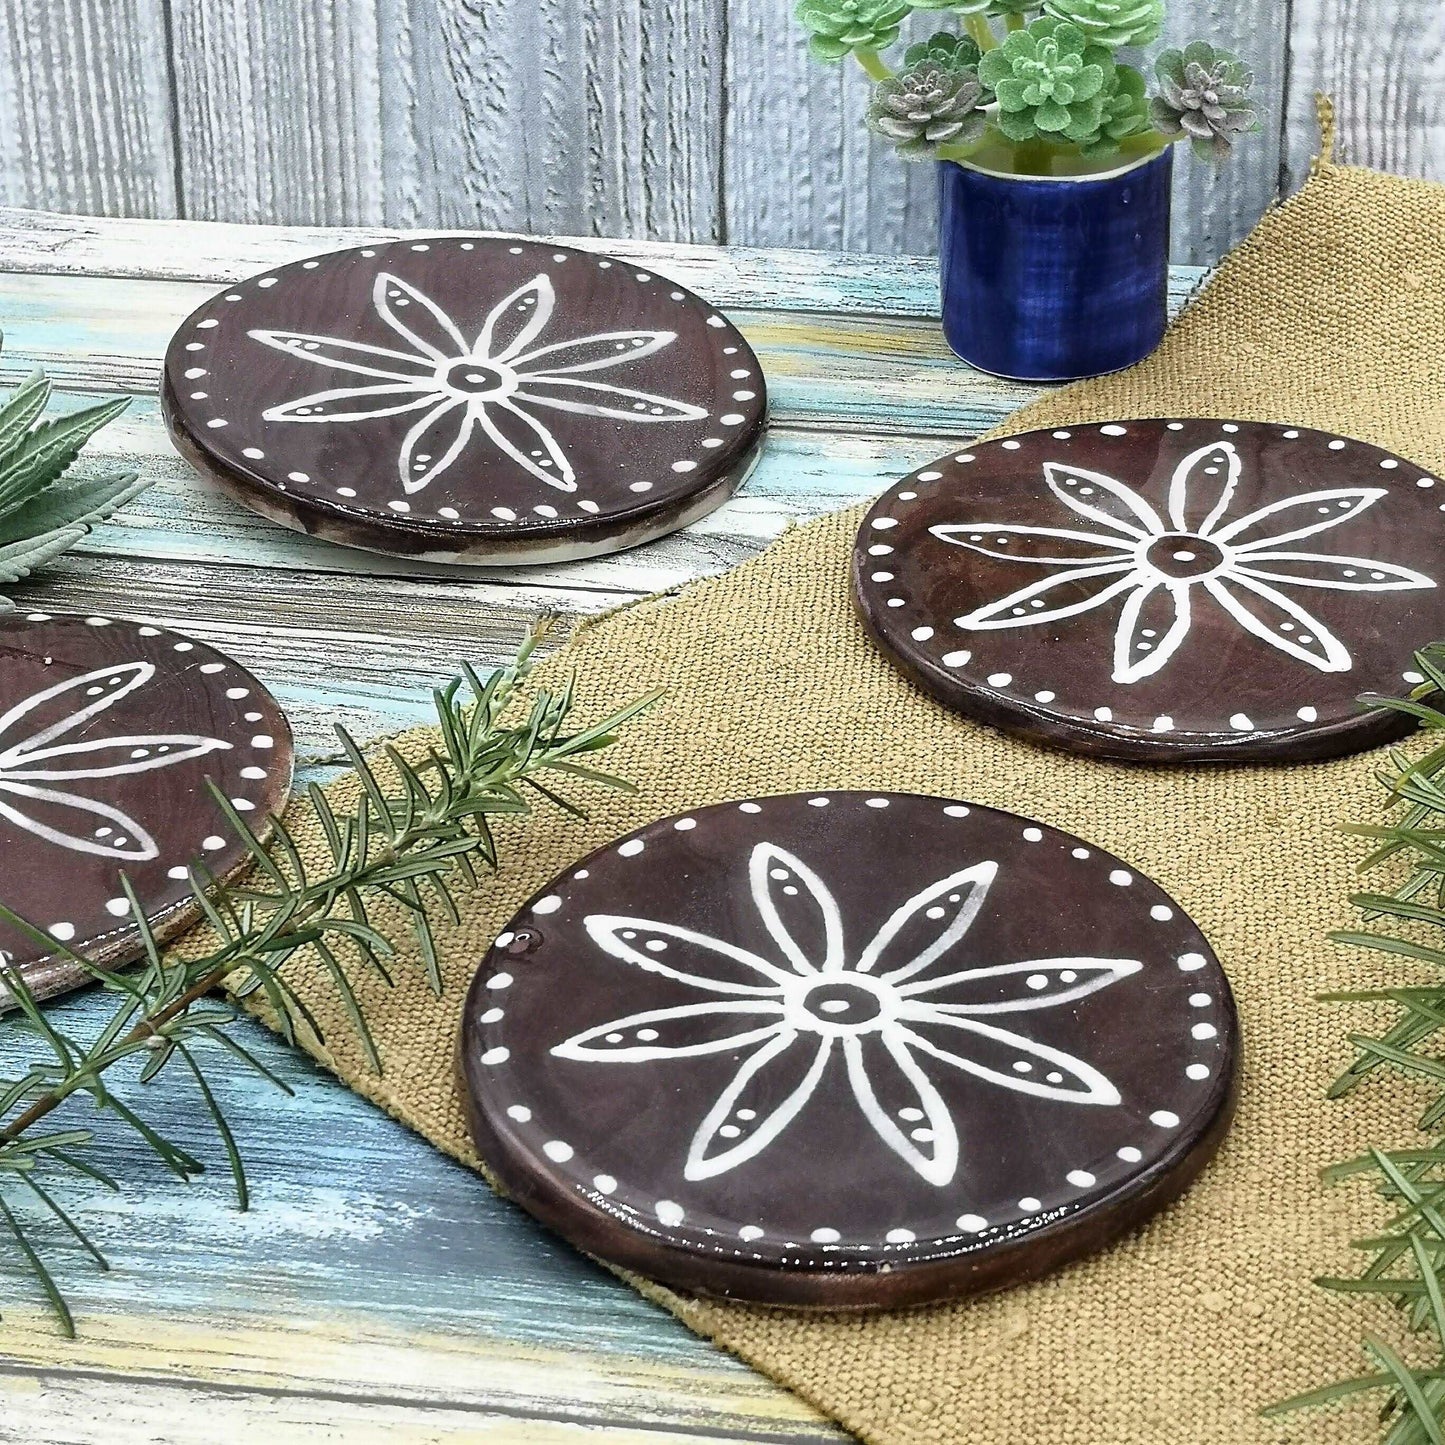 1Pc Handmade Ceramic Round Coaster Tile, Office Desk Acessories For Women With Floral Motif, Botanical Coaster, Housewarming Gift First Home